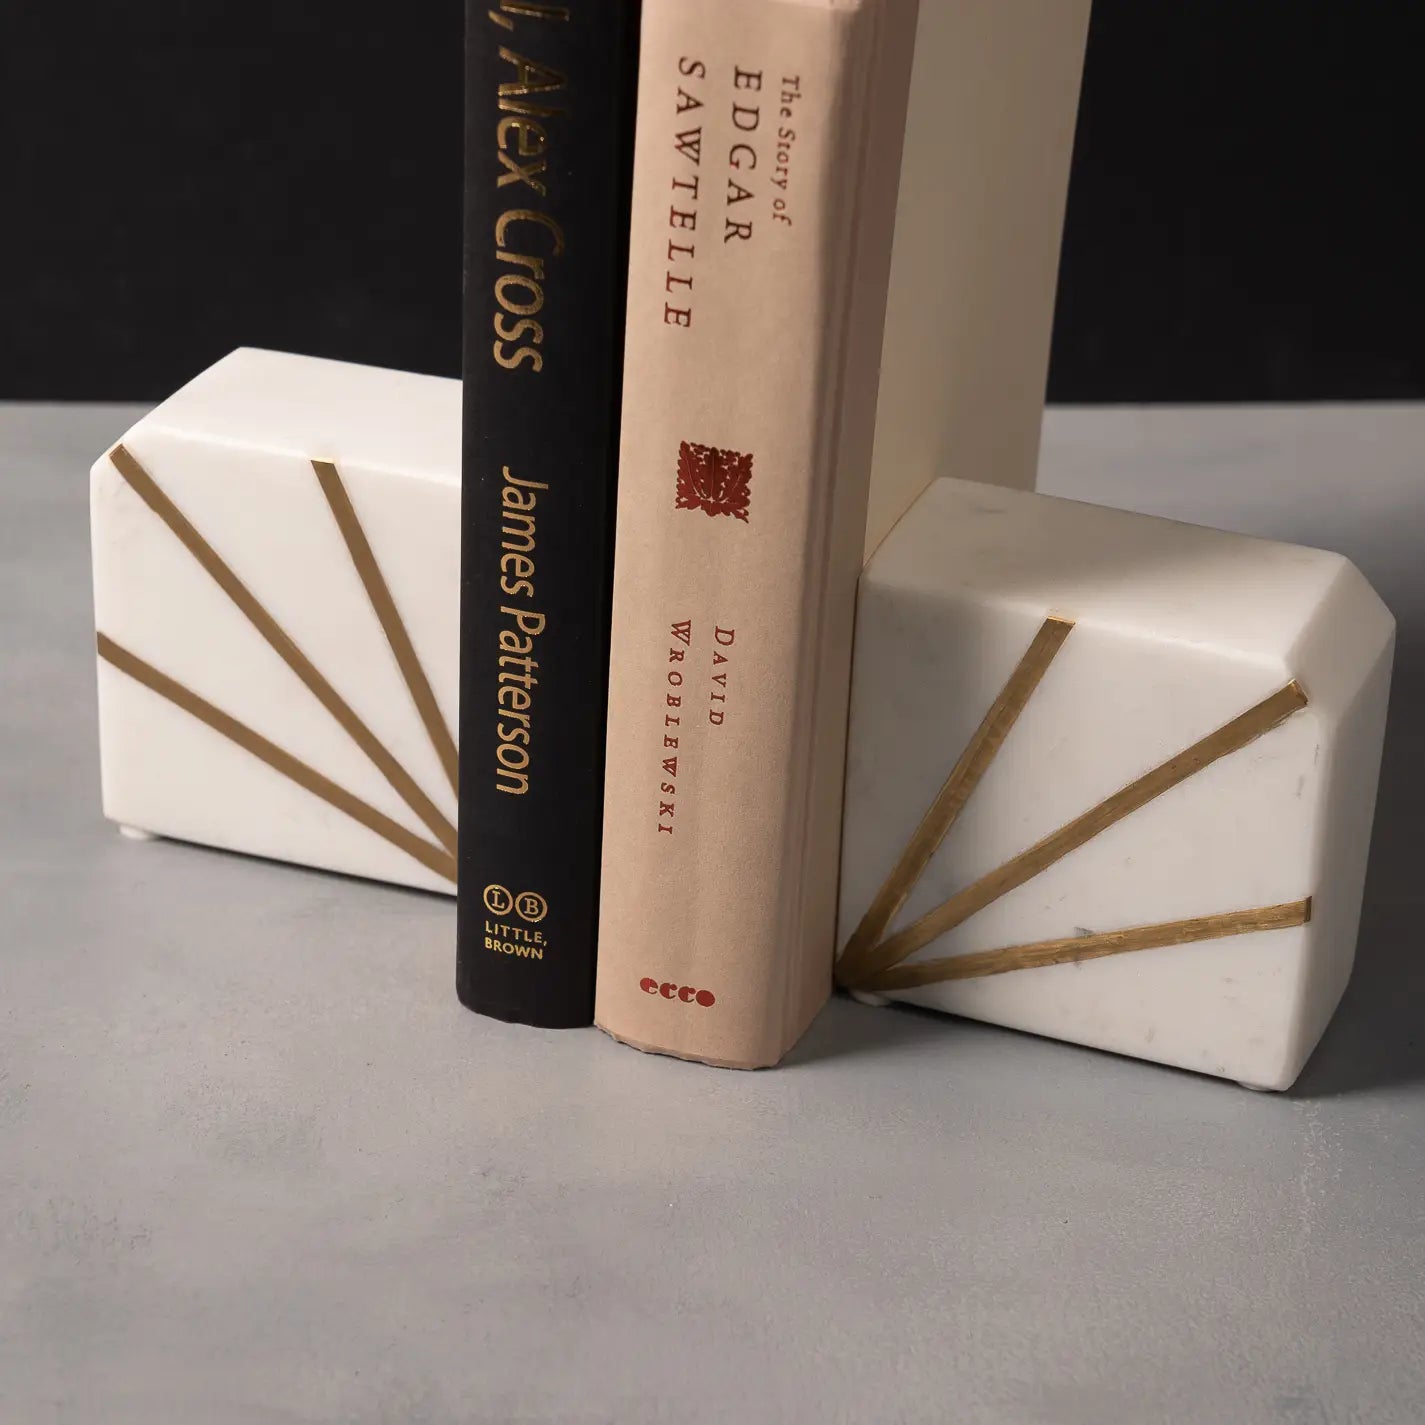 White Marble Square Bookends